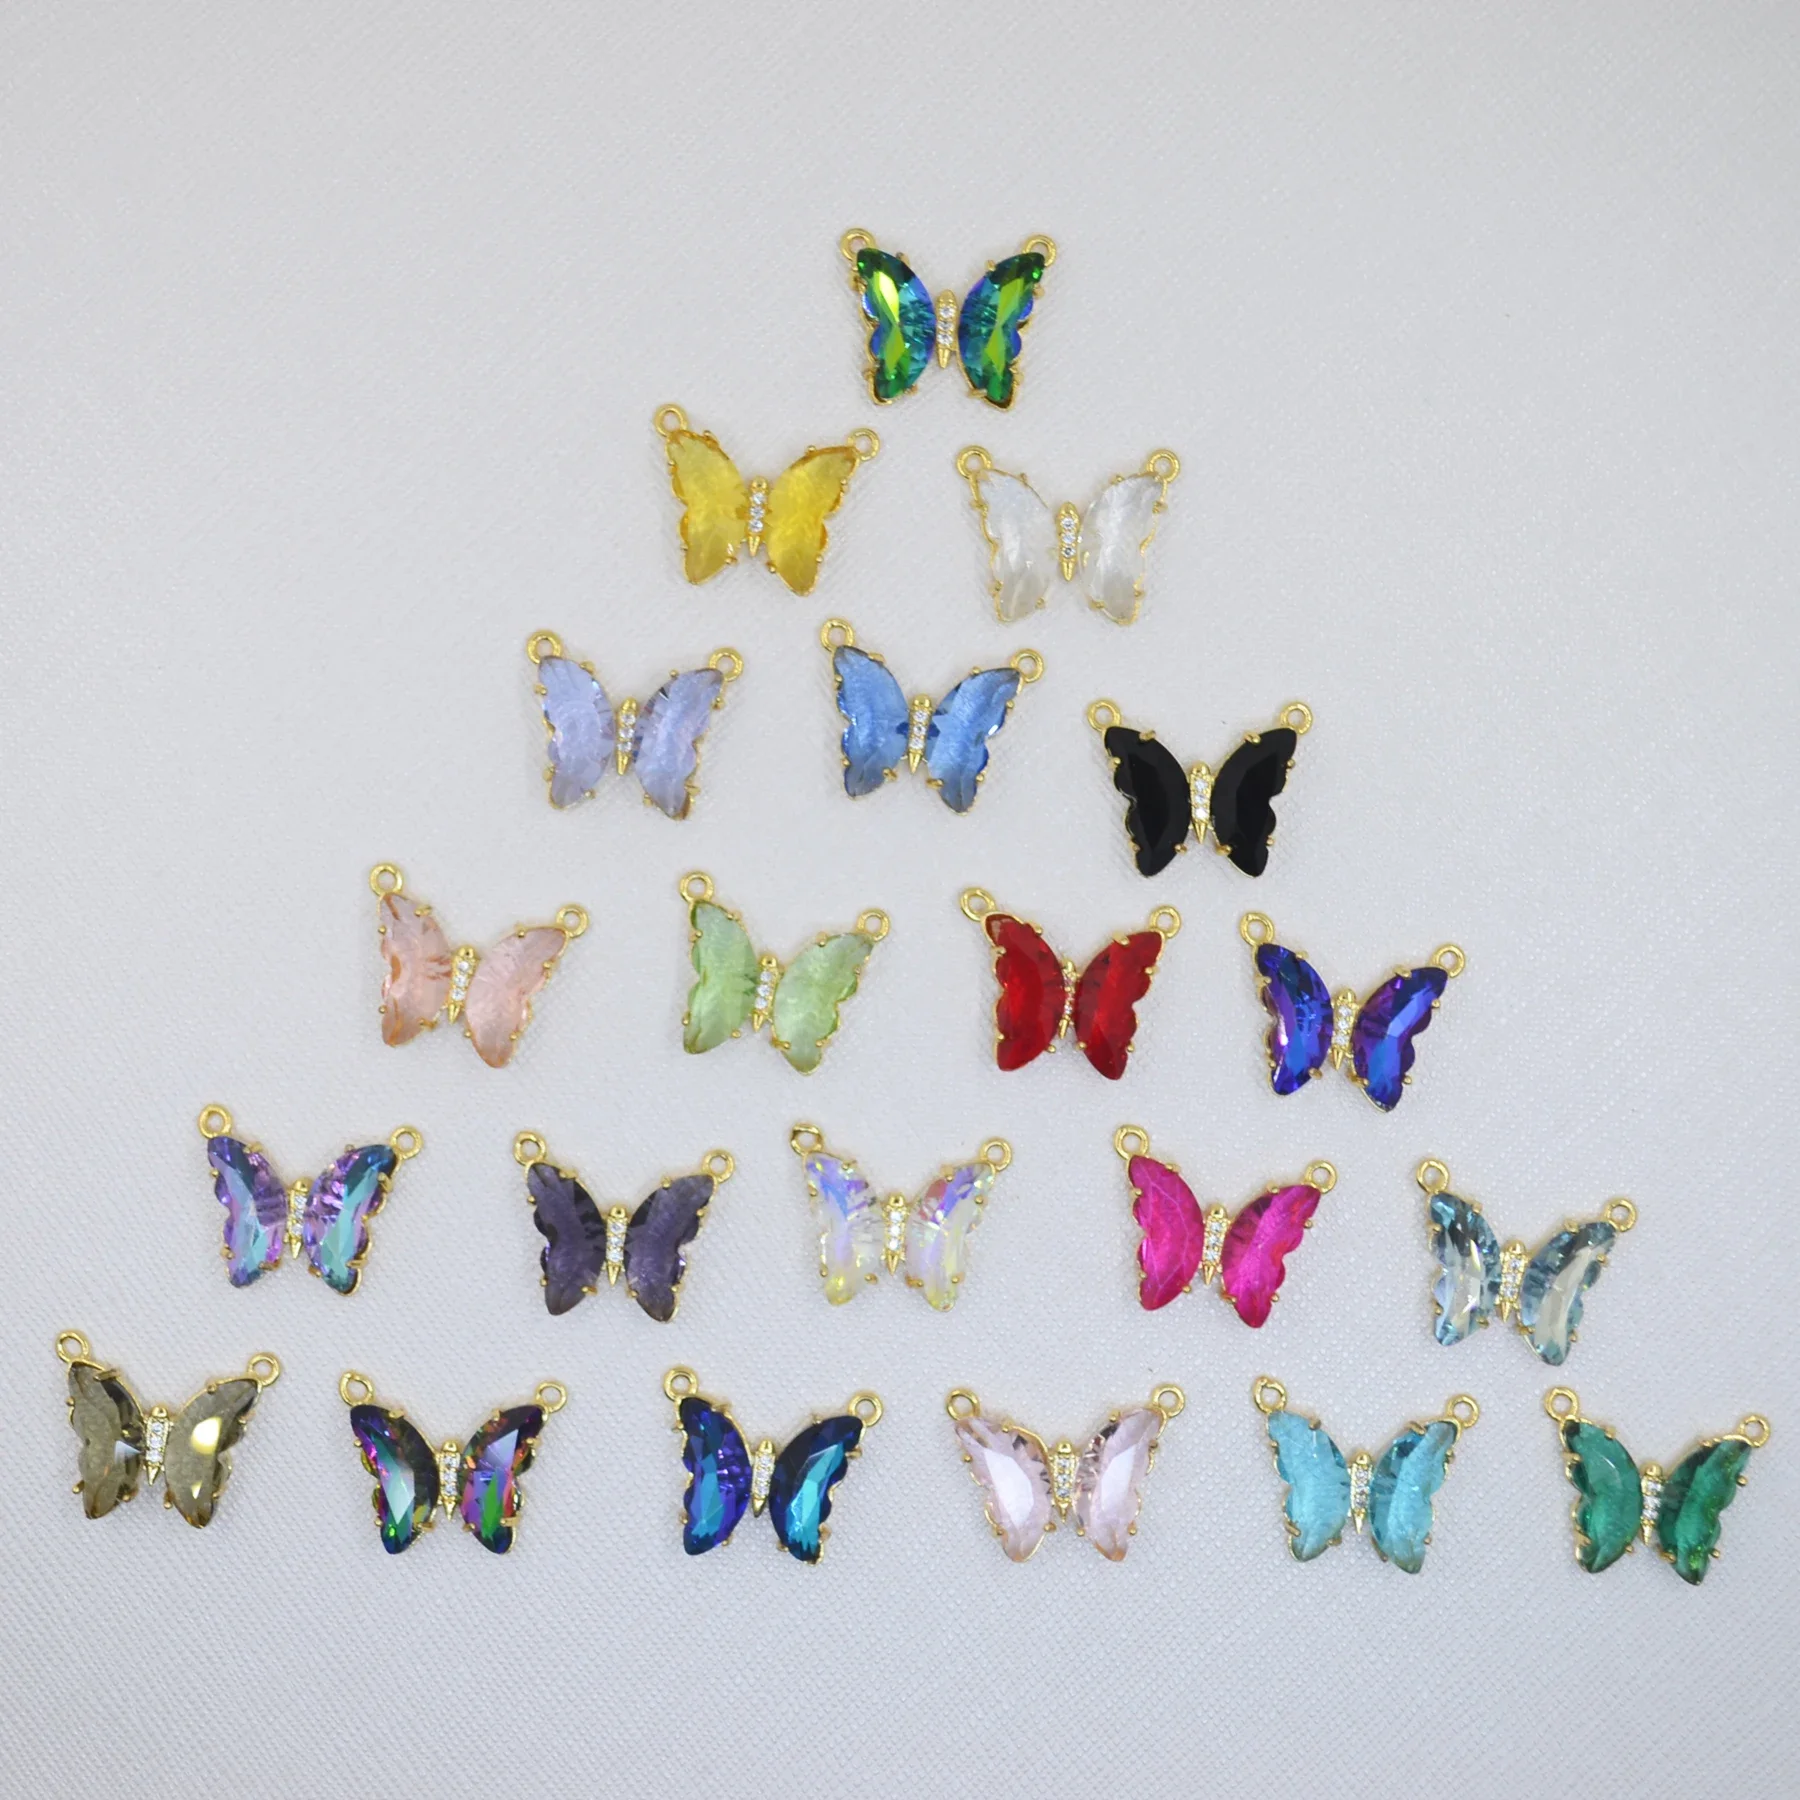 

17mm*22mm Color Butterfly Charm Necklace Hooks Chain Connection Pendant Clasp Jewellery Making Supplies Diy Bracelet Accessories